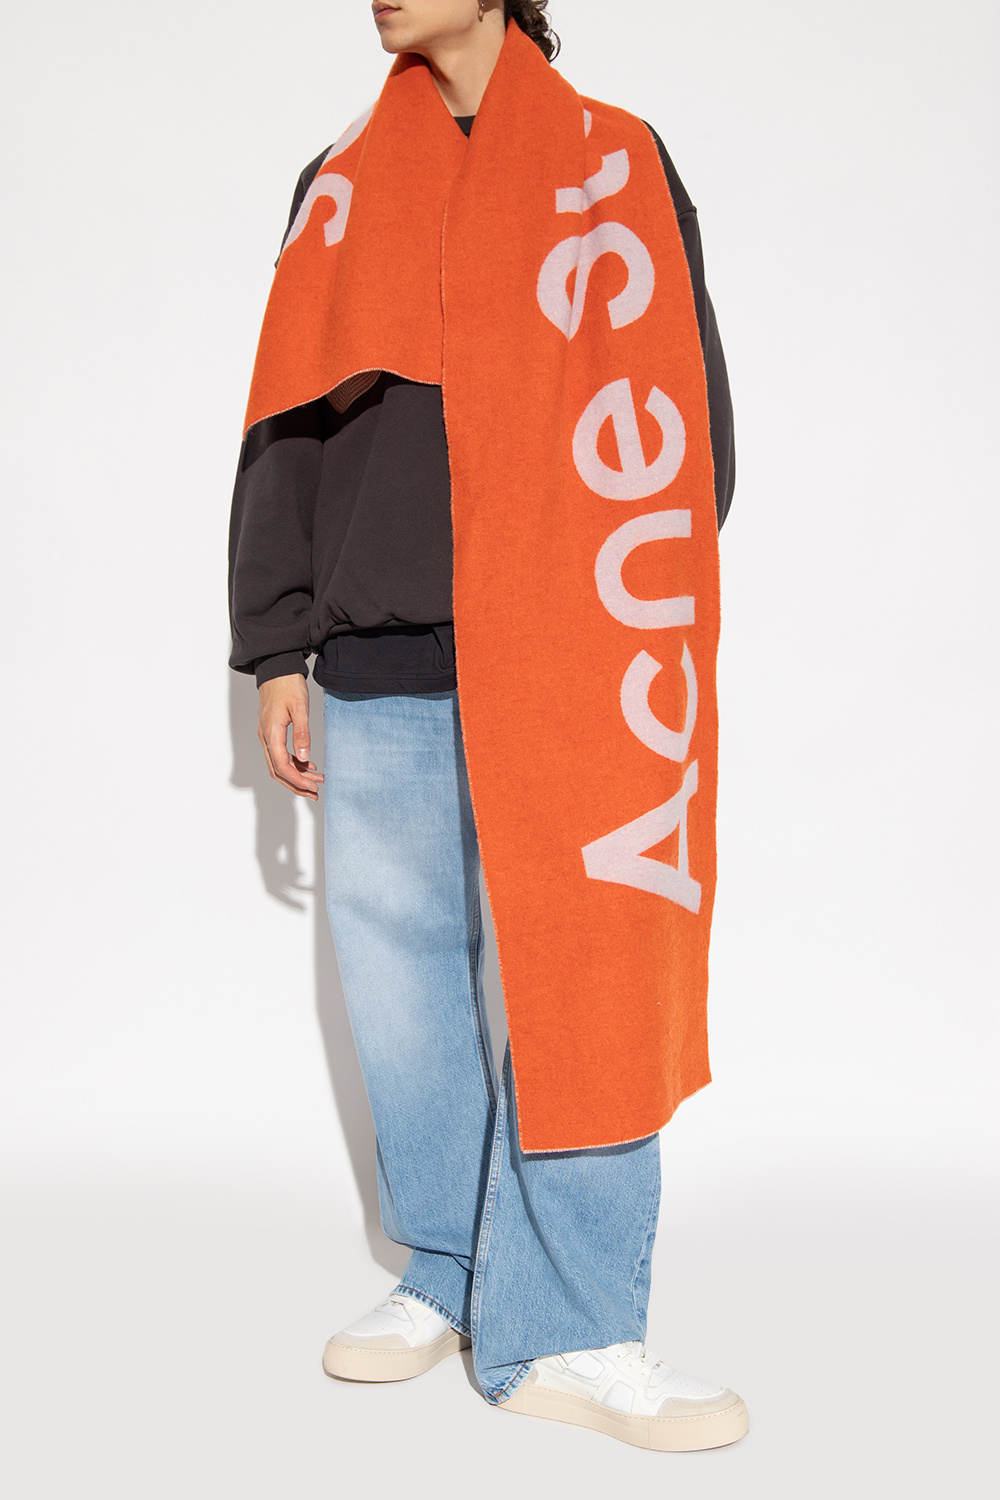 Acne Studios Lets keep in touch